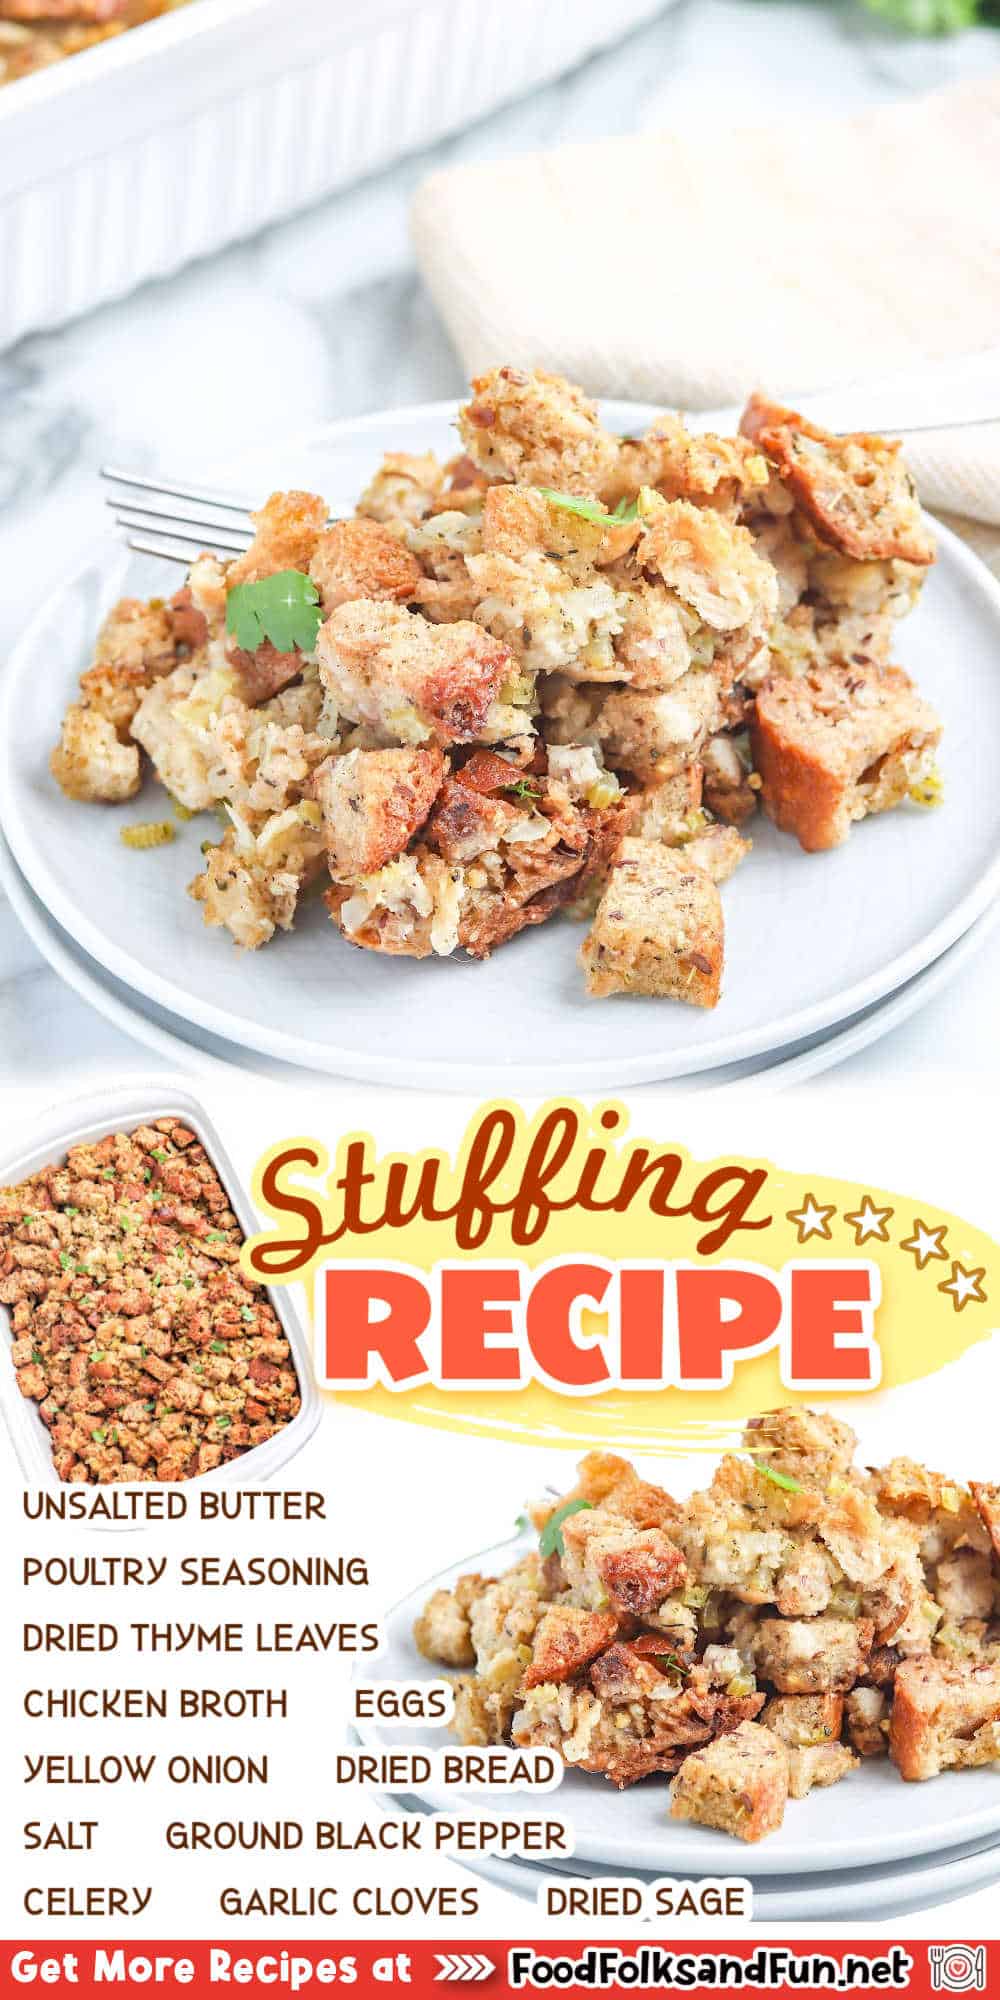 There is nothing quite like making a delicious meal from scratch. Homemade stuffing is an easy dish to make, and it will impress your family and friends. via @foodfolksandfun